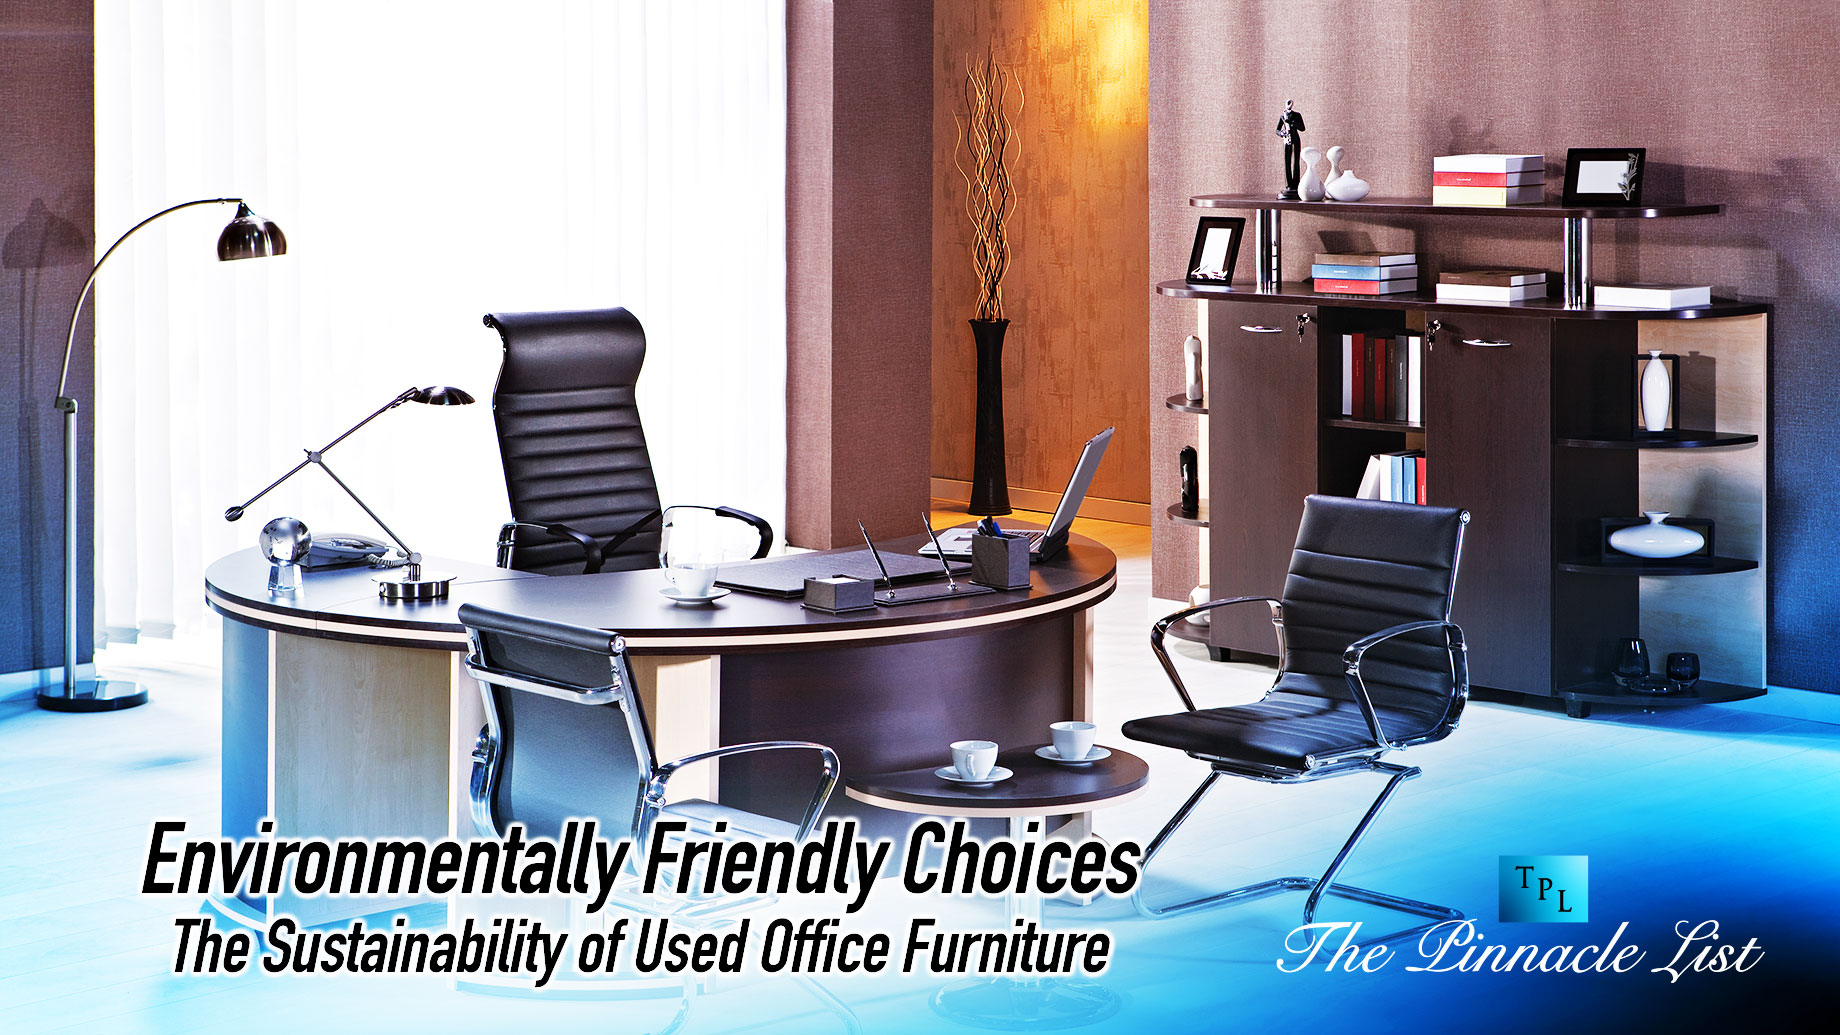 Environmentally Friendly Choices: The Sustainability of Used Office Furniture